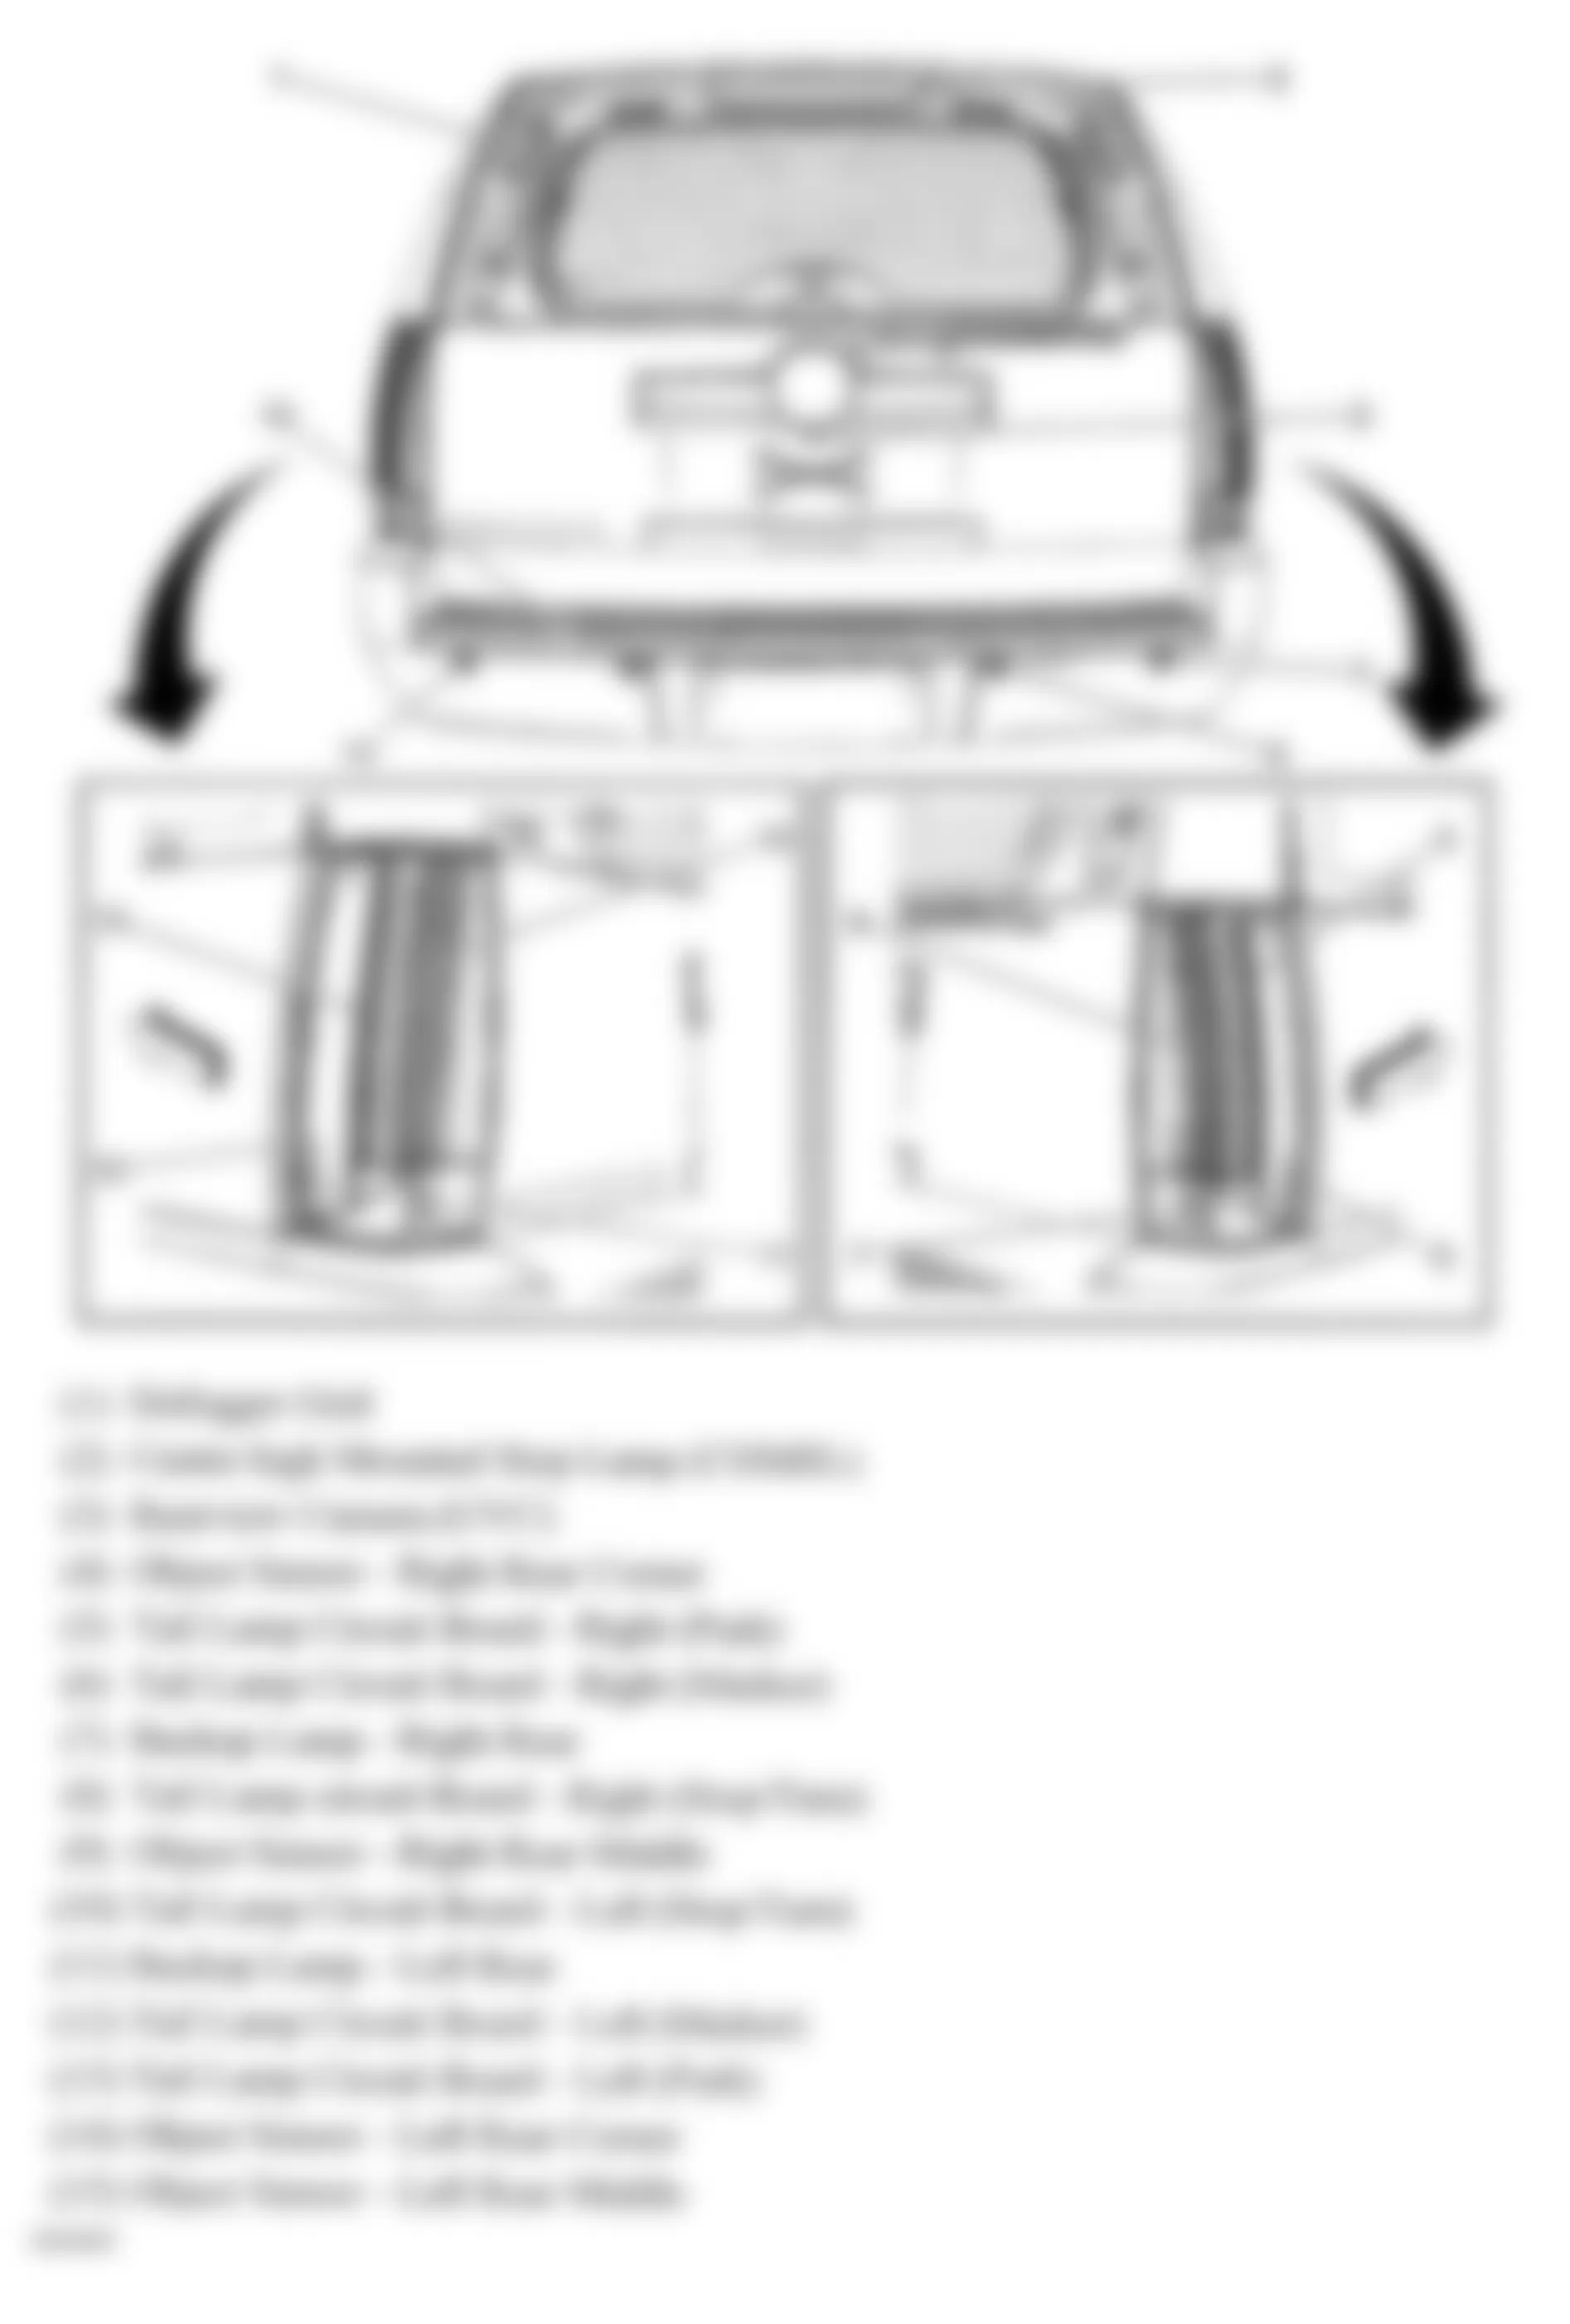 Chevrolet Suburban C2500 2008 - Component Locations -  Rear Of Vehicle (Tahoe & Escalade W/One Piece Liftgate)